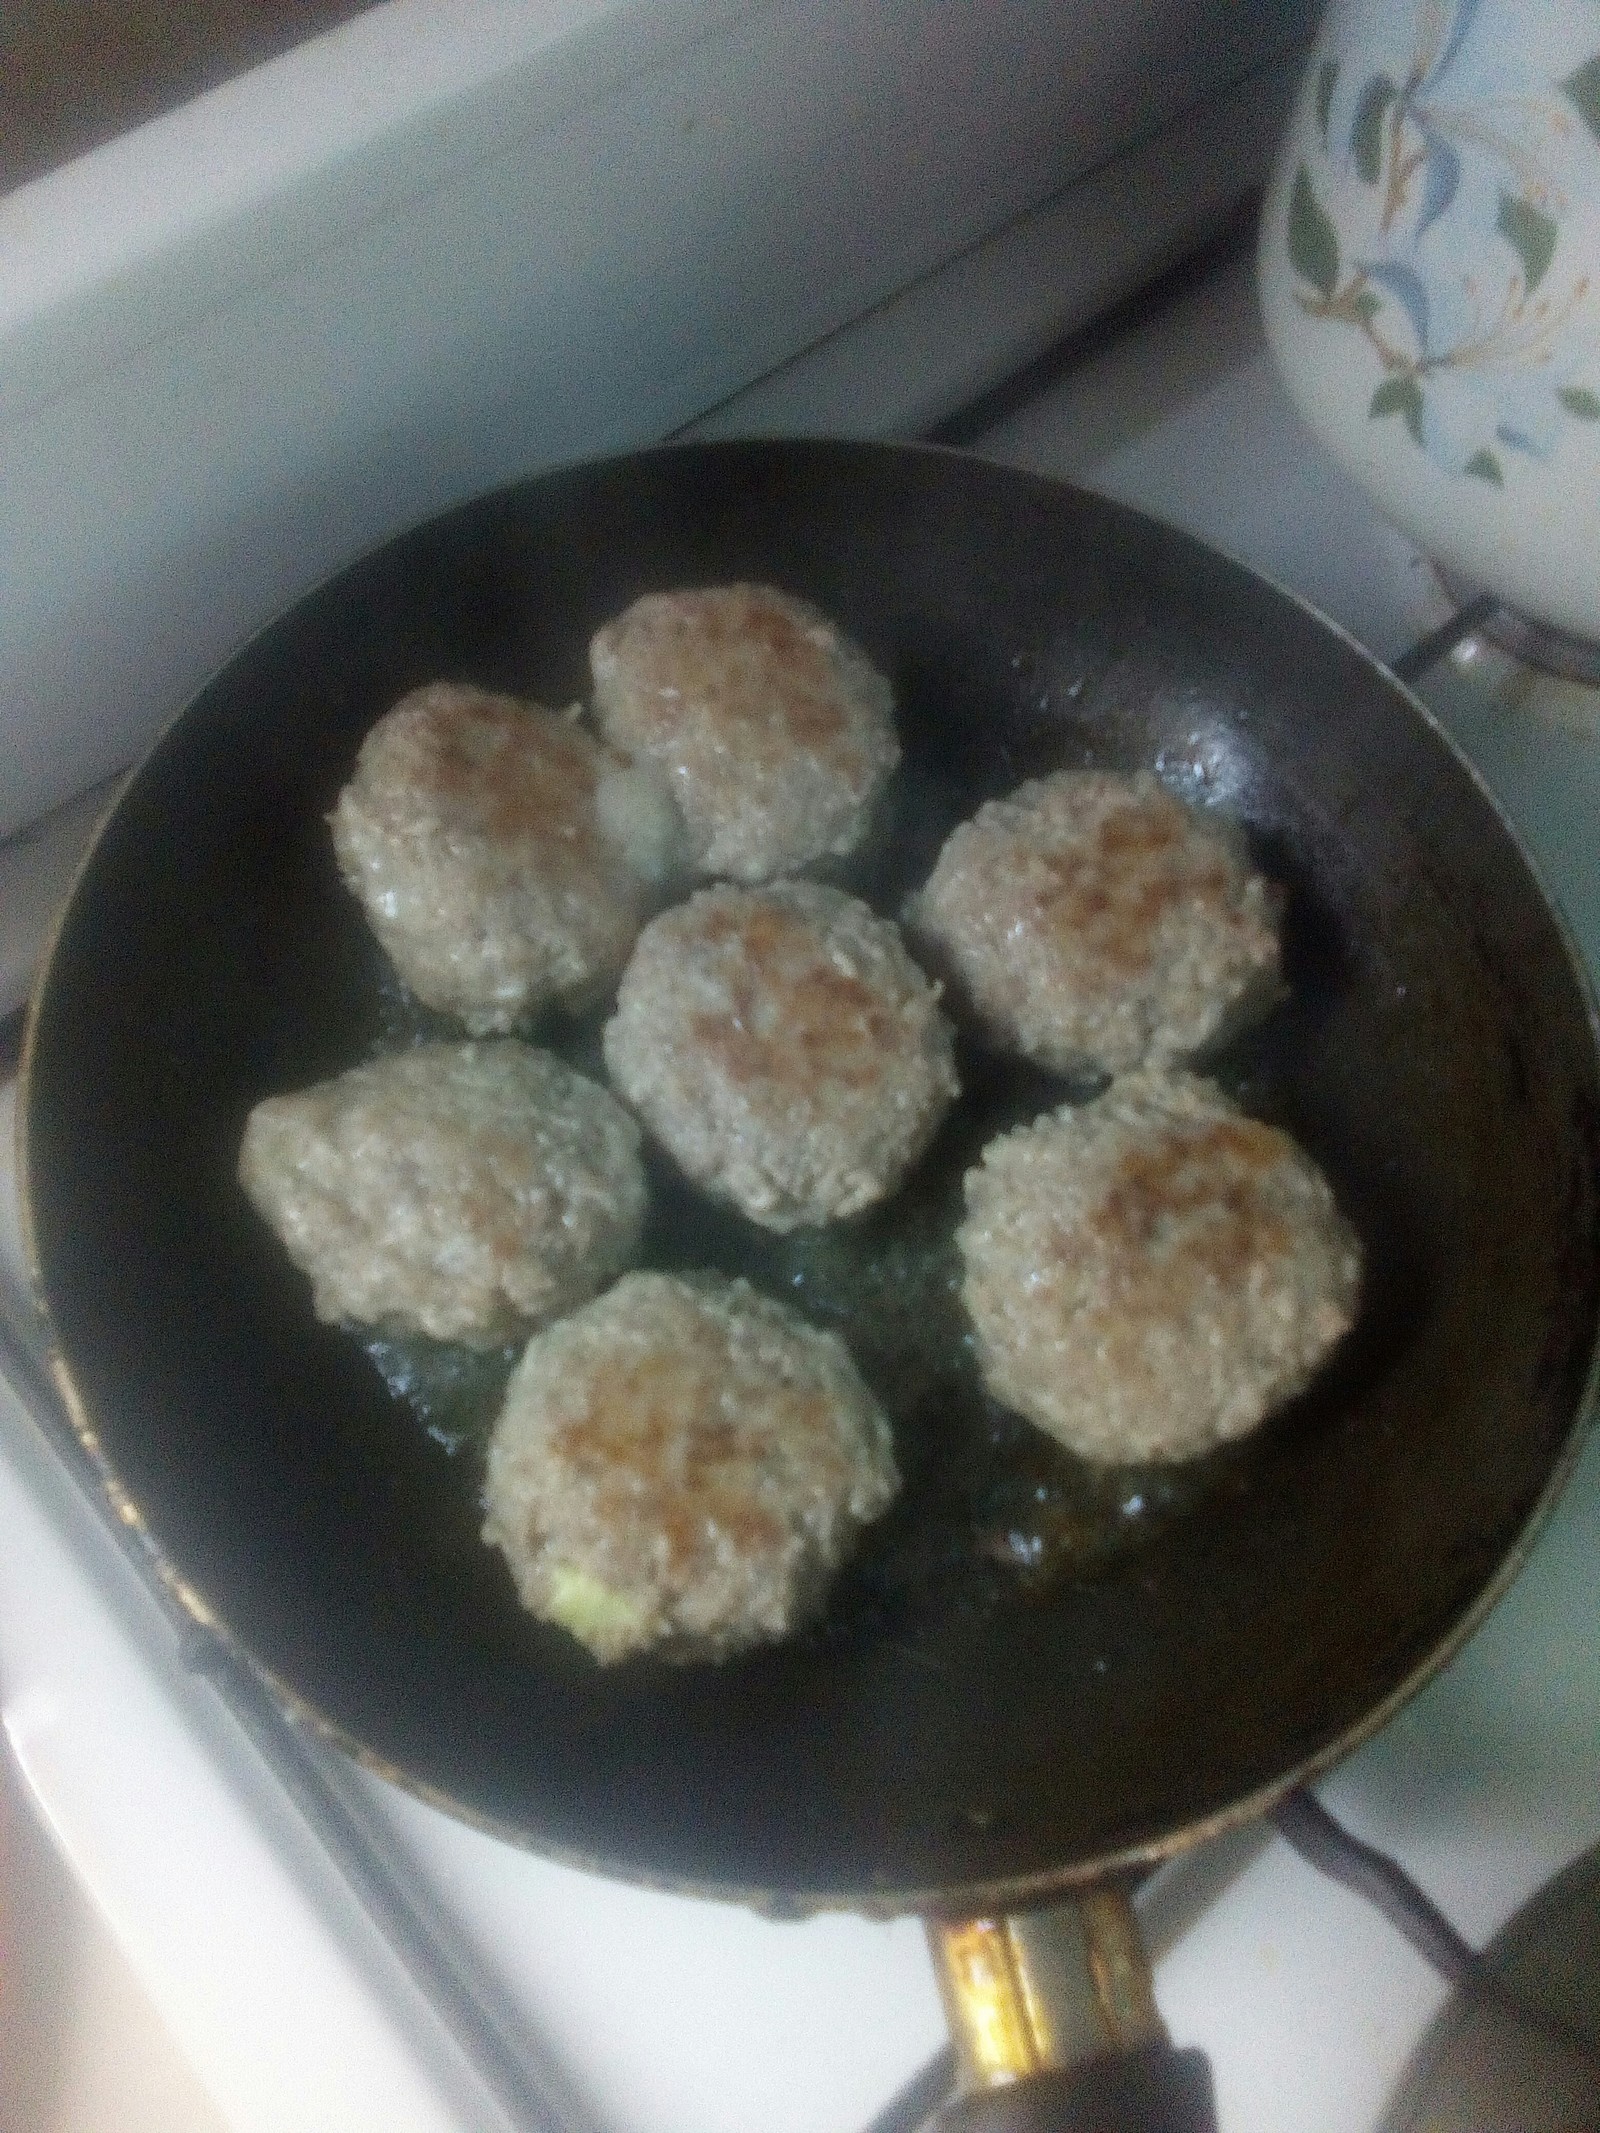 About cooking meatballs! - Food, To eat, Cutlets, My